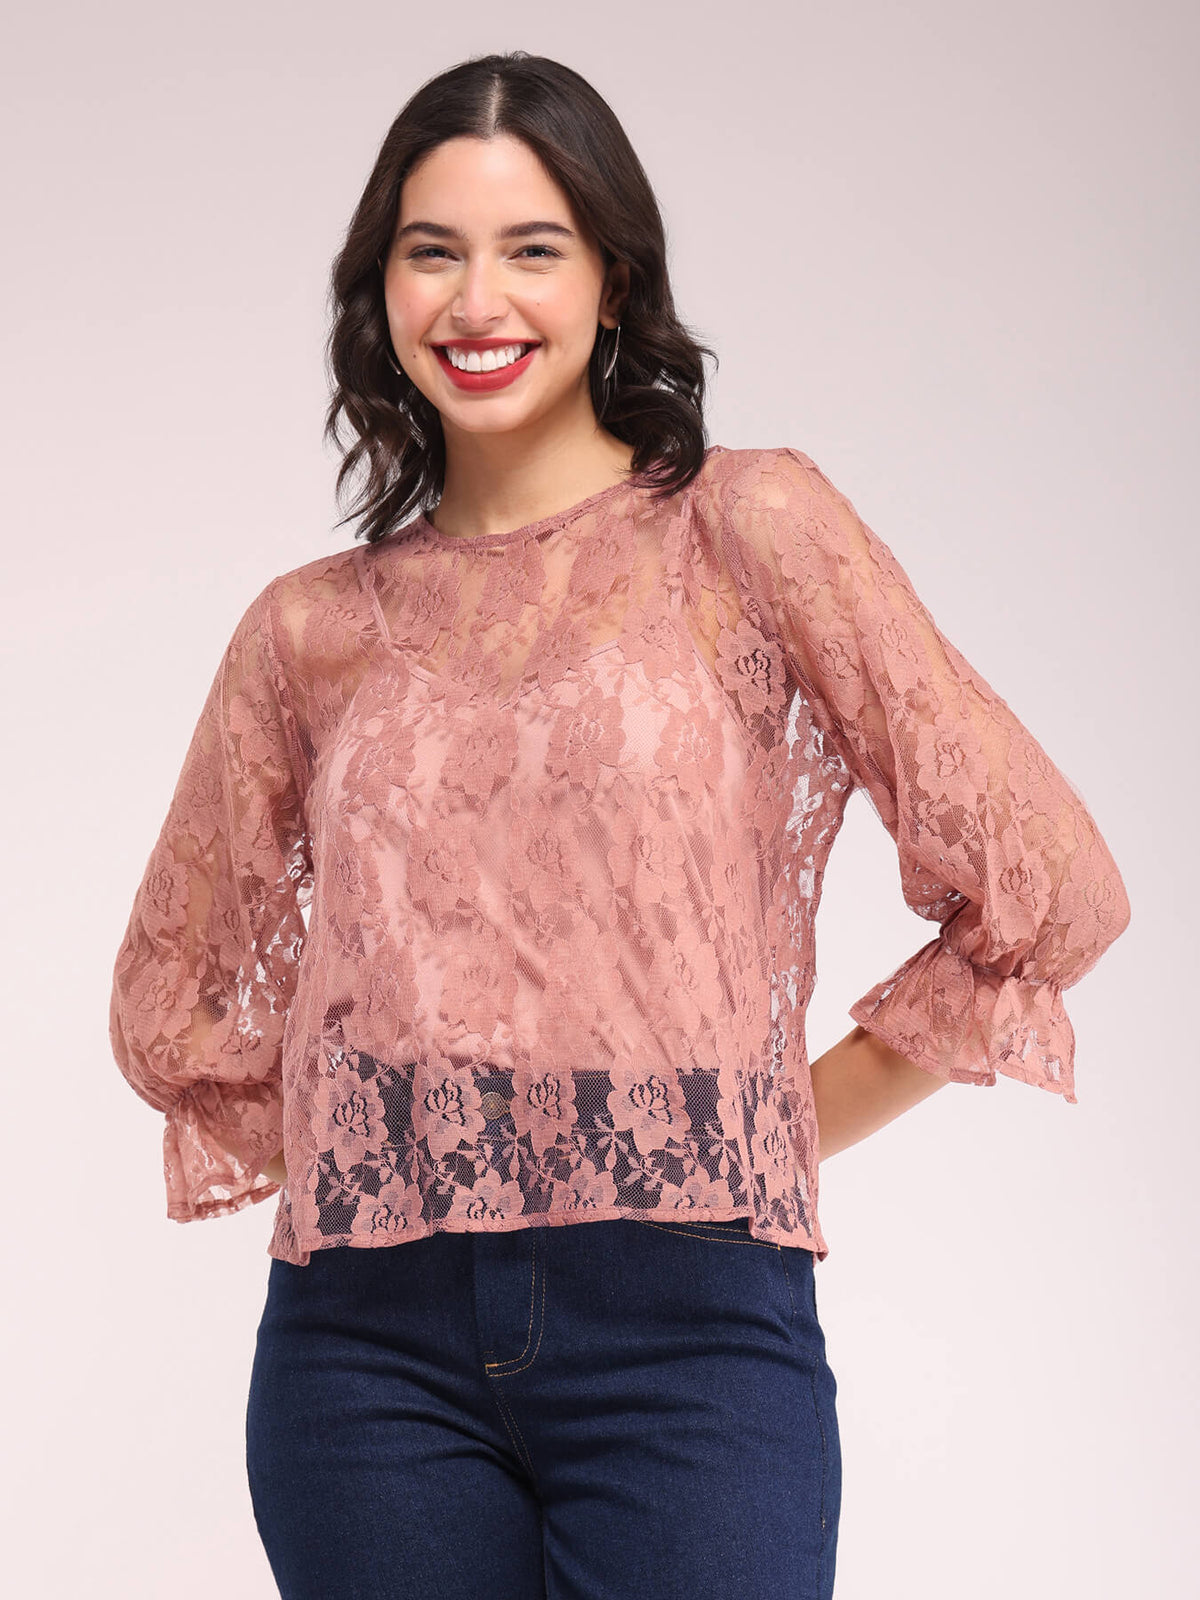 Crew Neck Lace Top - Pink